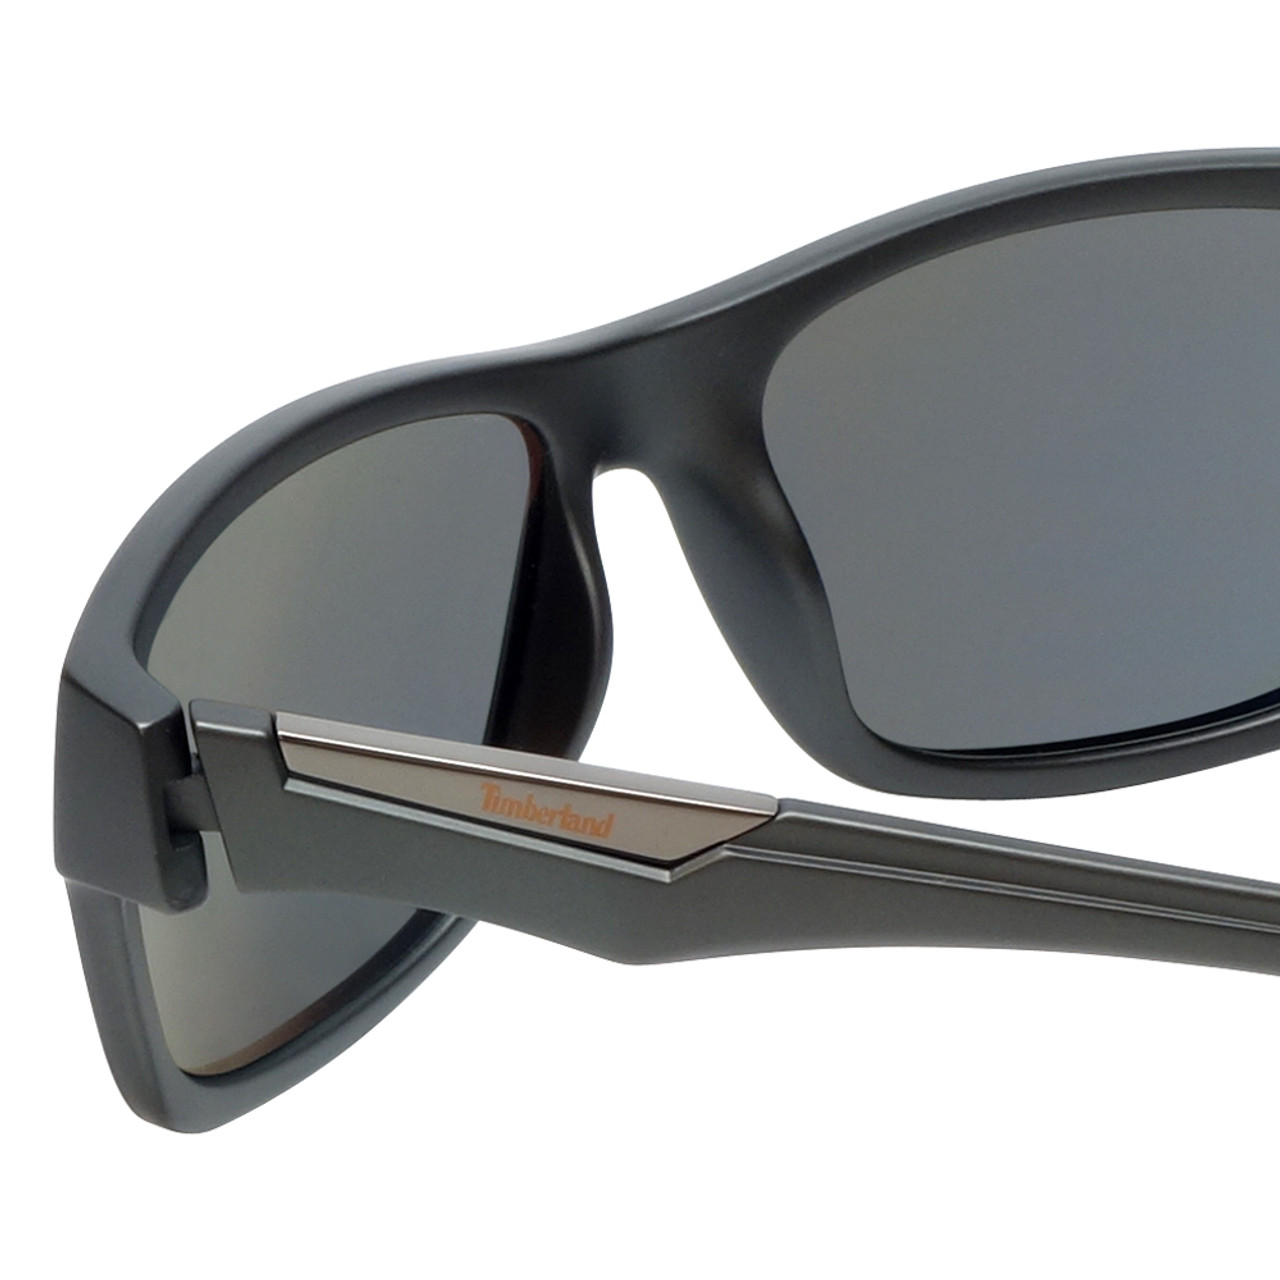 Timberland TB9078-20D Designer Polarized Sunglasses in Matte Black with Grey Lens